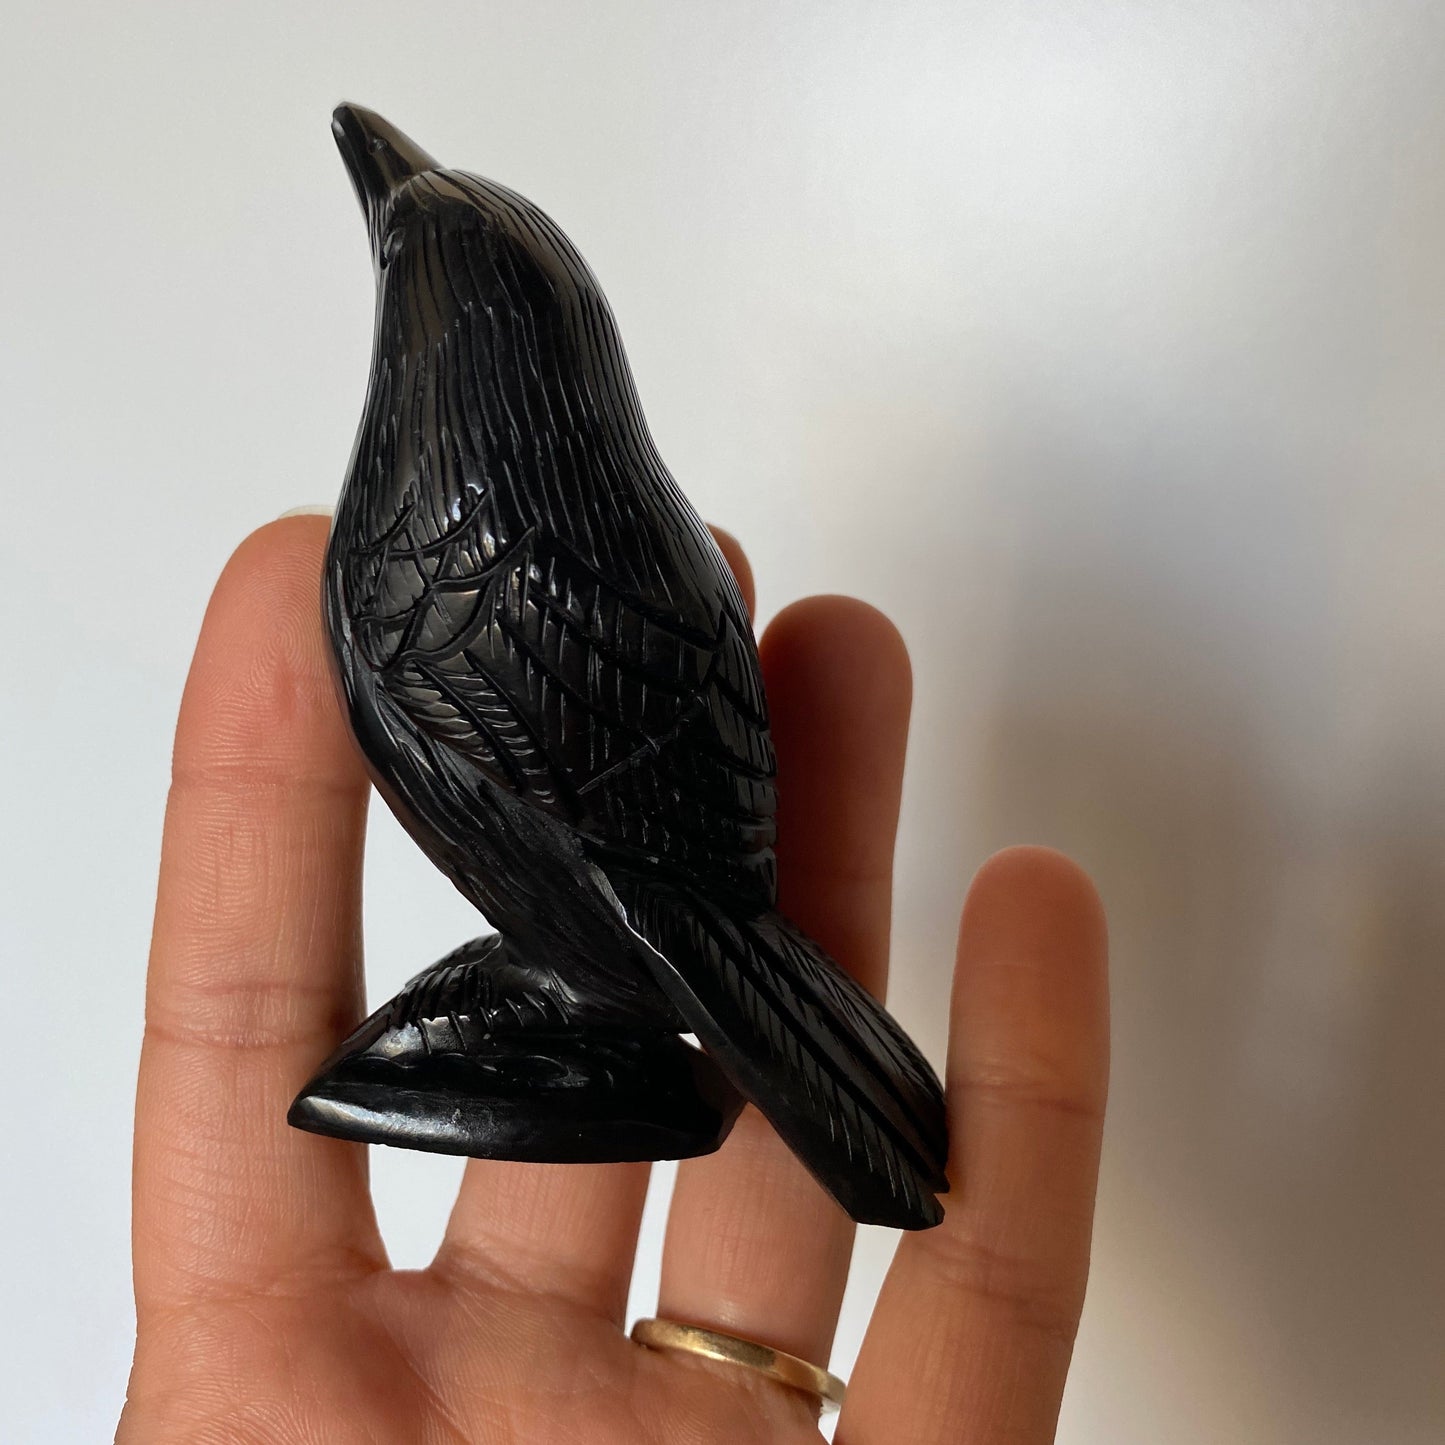 Obsidian Crow Raven Carving